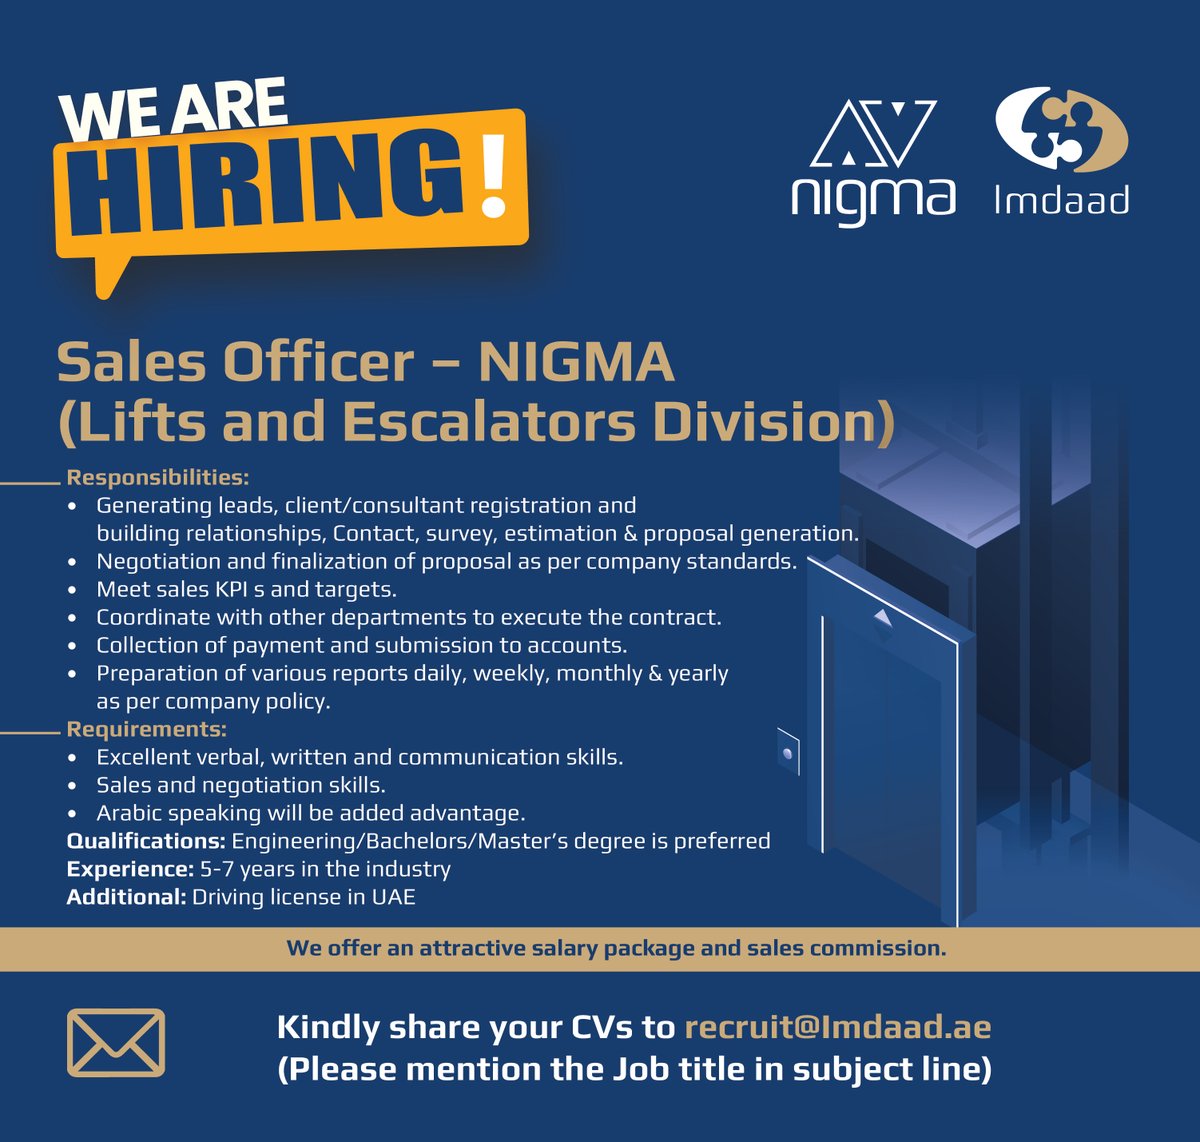 We’re #hiring!

Position:
Sales Officer - Nigma ( Lifts and Escalators Division )

Interested candidates may send their CVs to: recruit@imdaad.ae
Please mention the job title in the subject line.

#jobs #vacancies #softfm #facilitiesmanagement #ImdaadGroup #Nigma